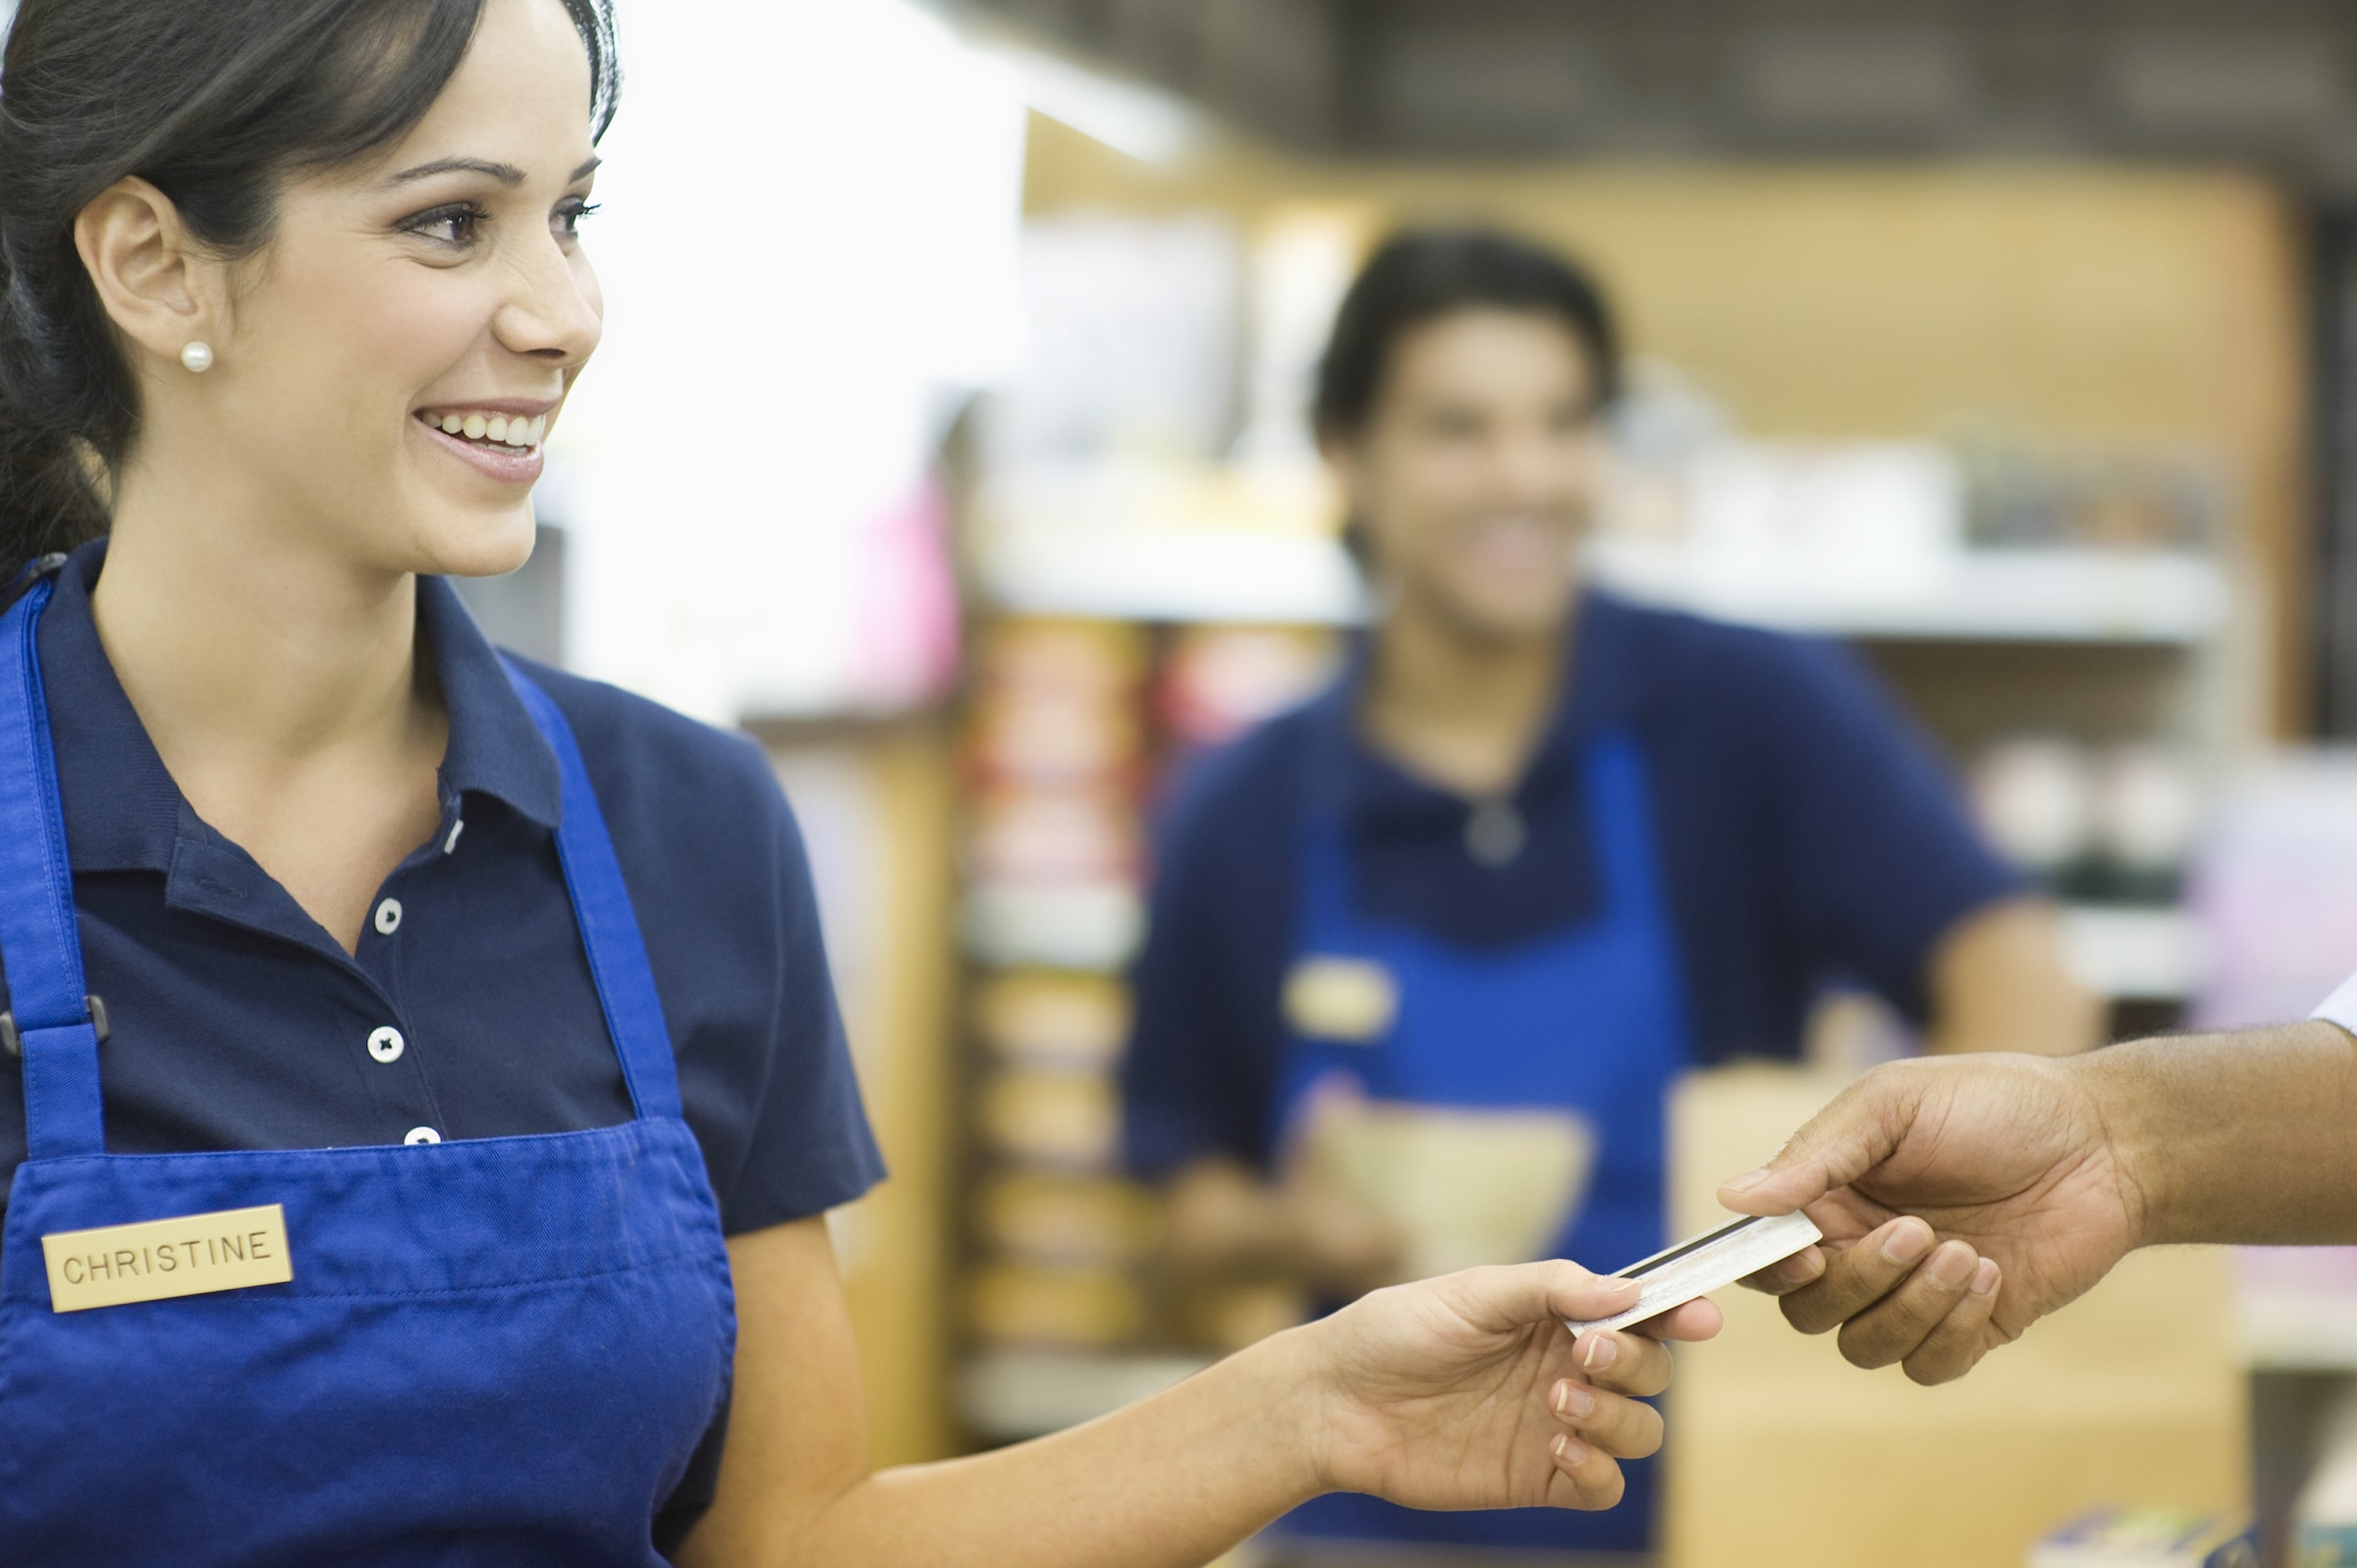 These top customer retention strategies are optimal for CPG brands